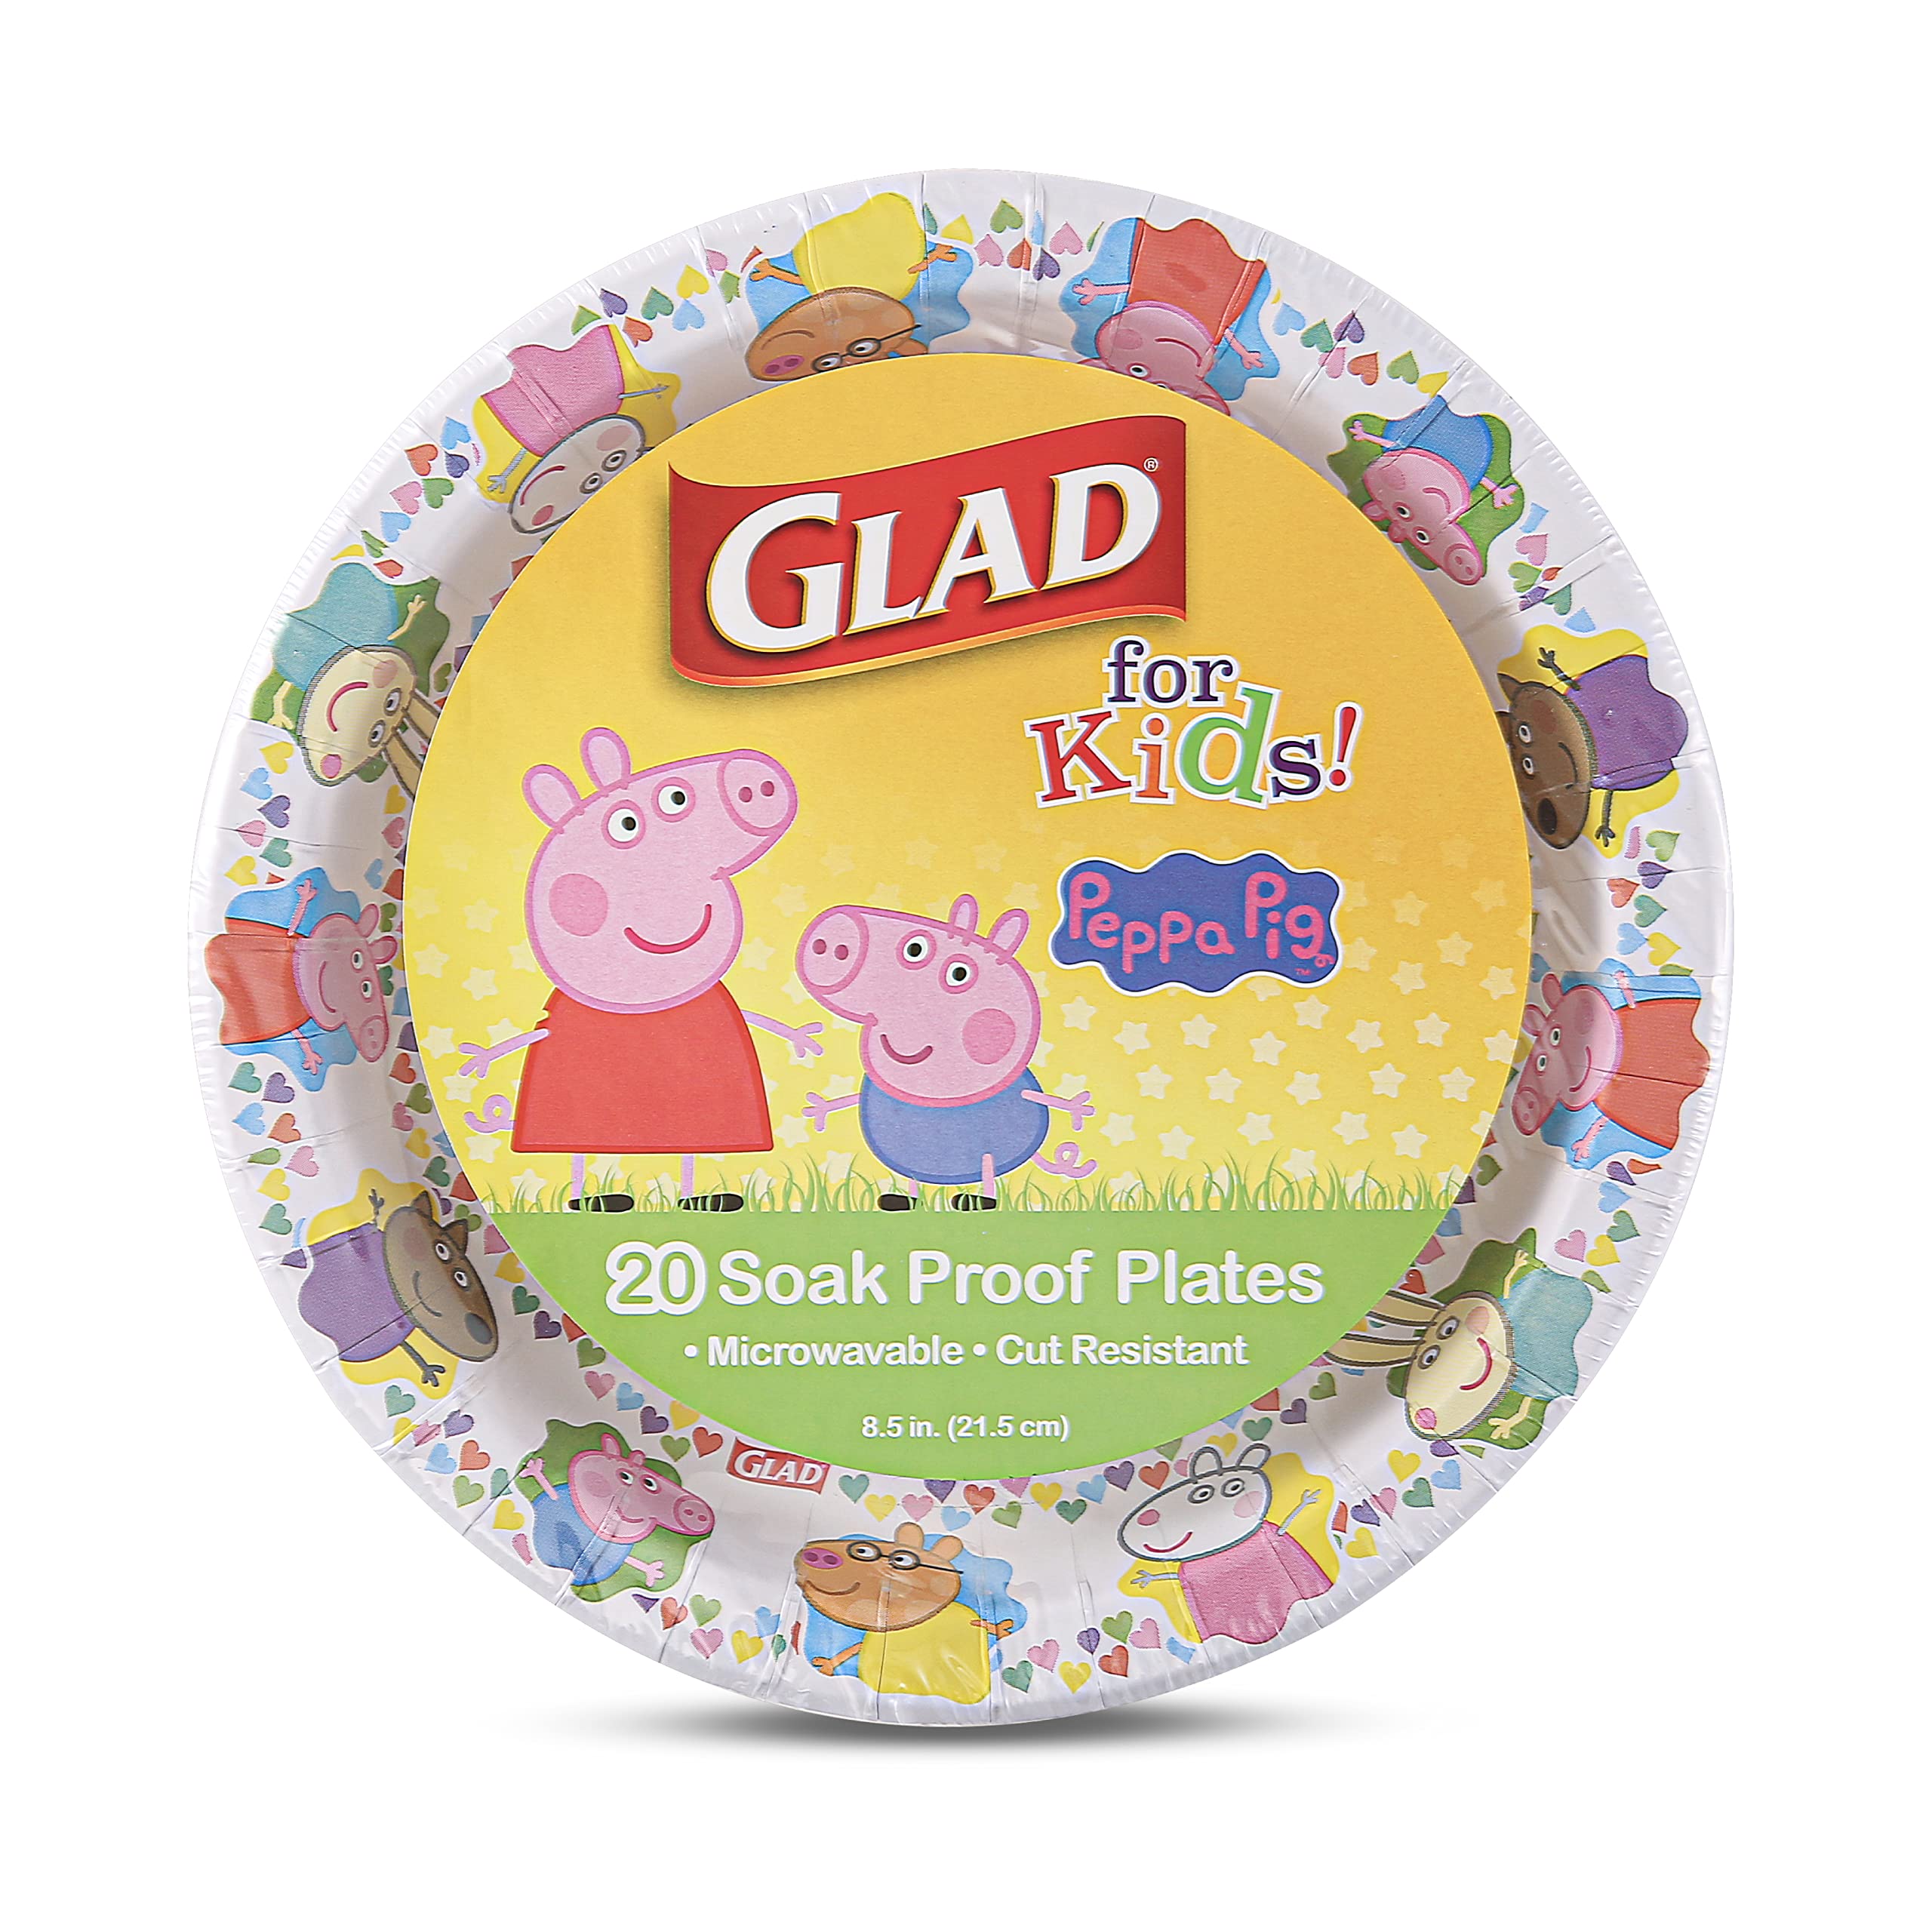 Glad for Kids 9 oz Peppa Pig Friends Paper Cups, 20 Ct